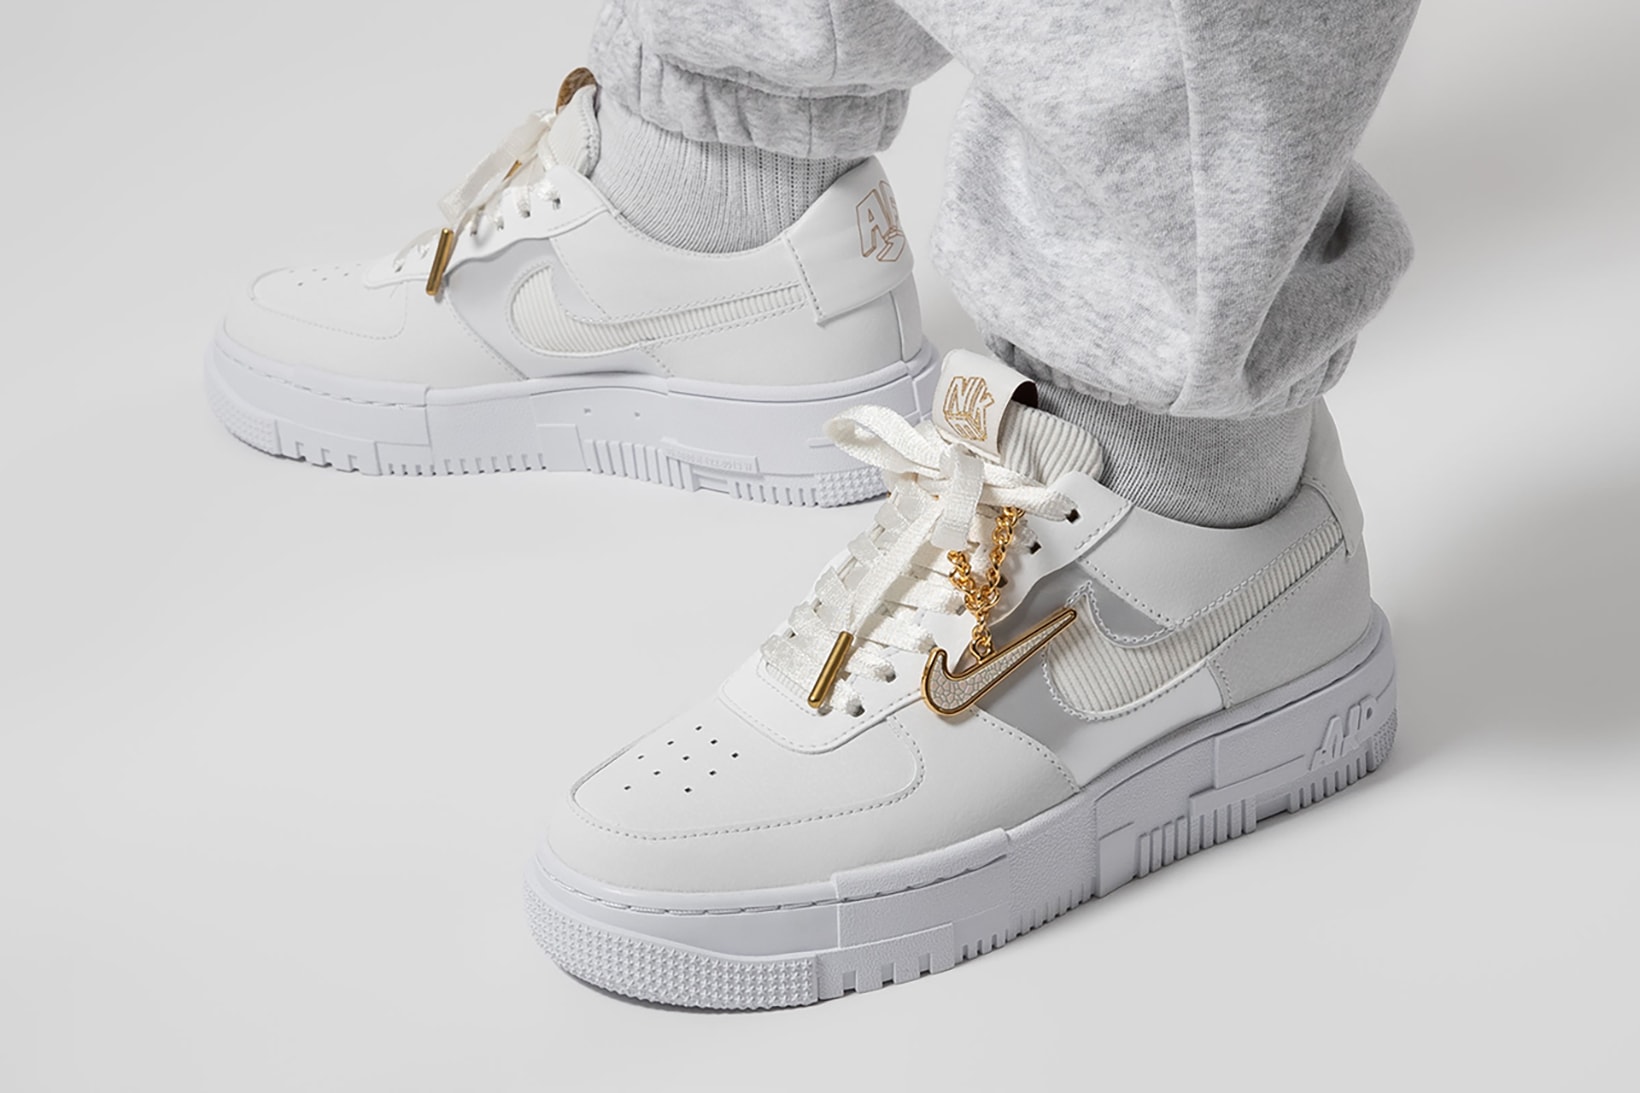 Nike Air Force 1 Pixel Gold Pendant Jewelry Sneaker White